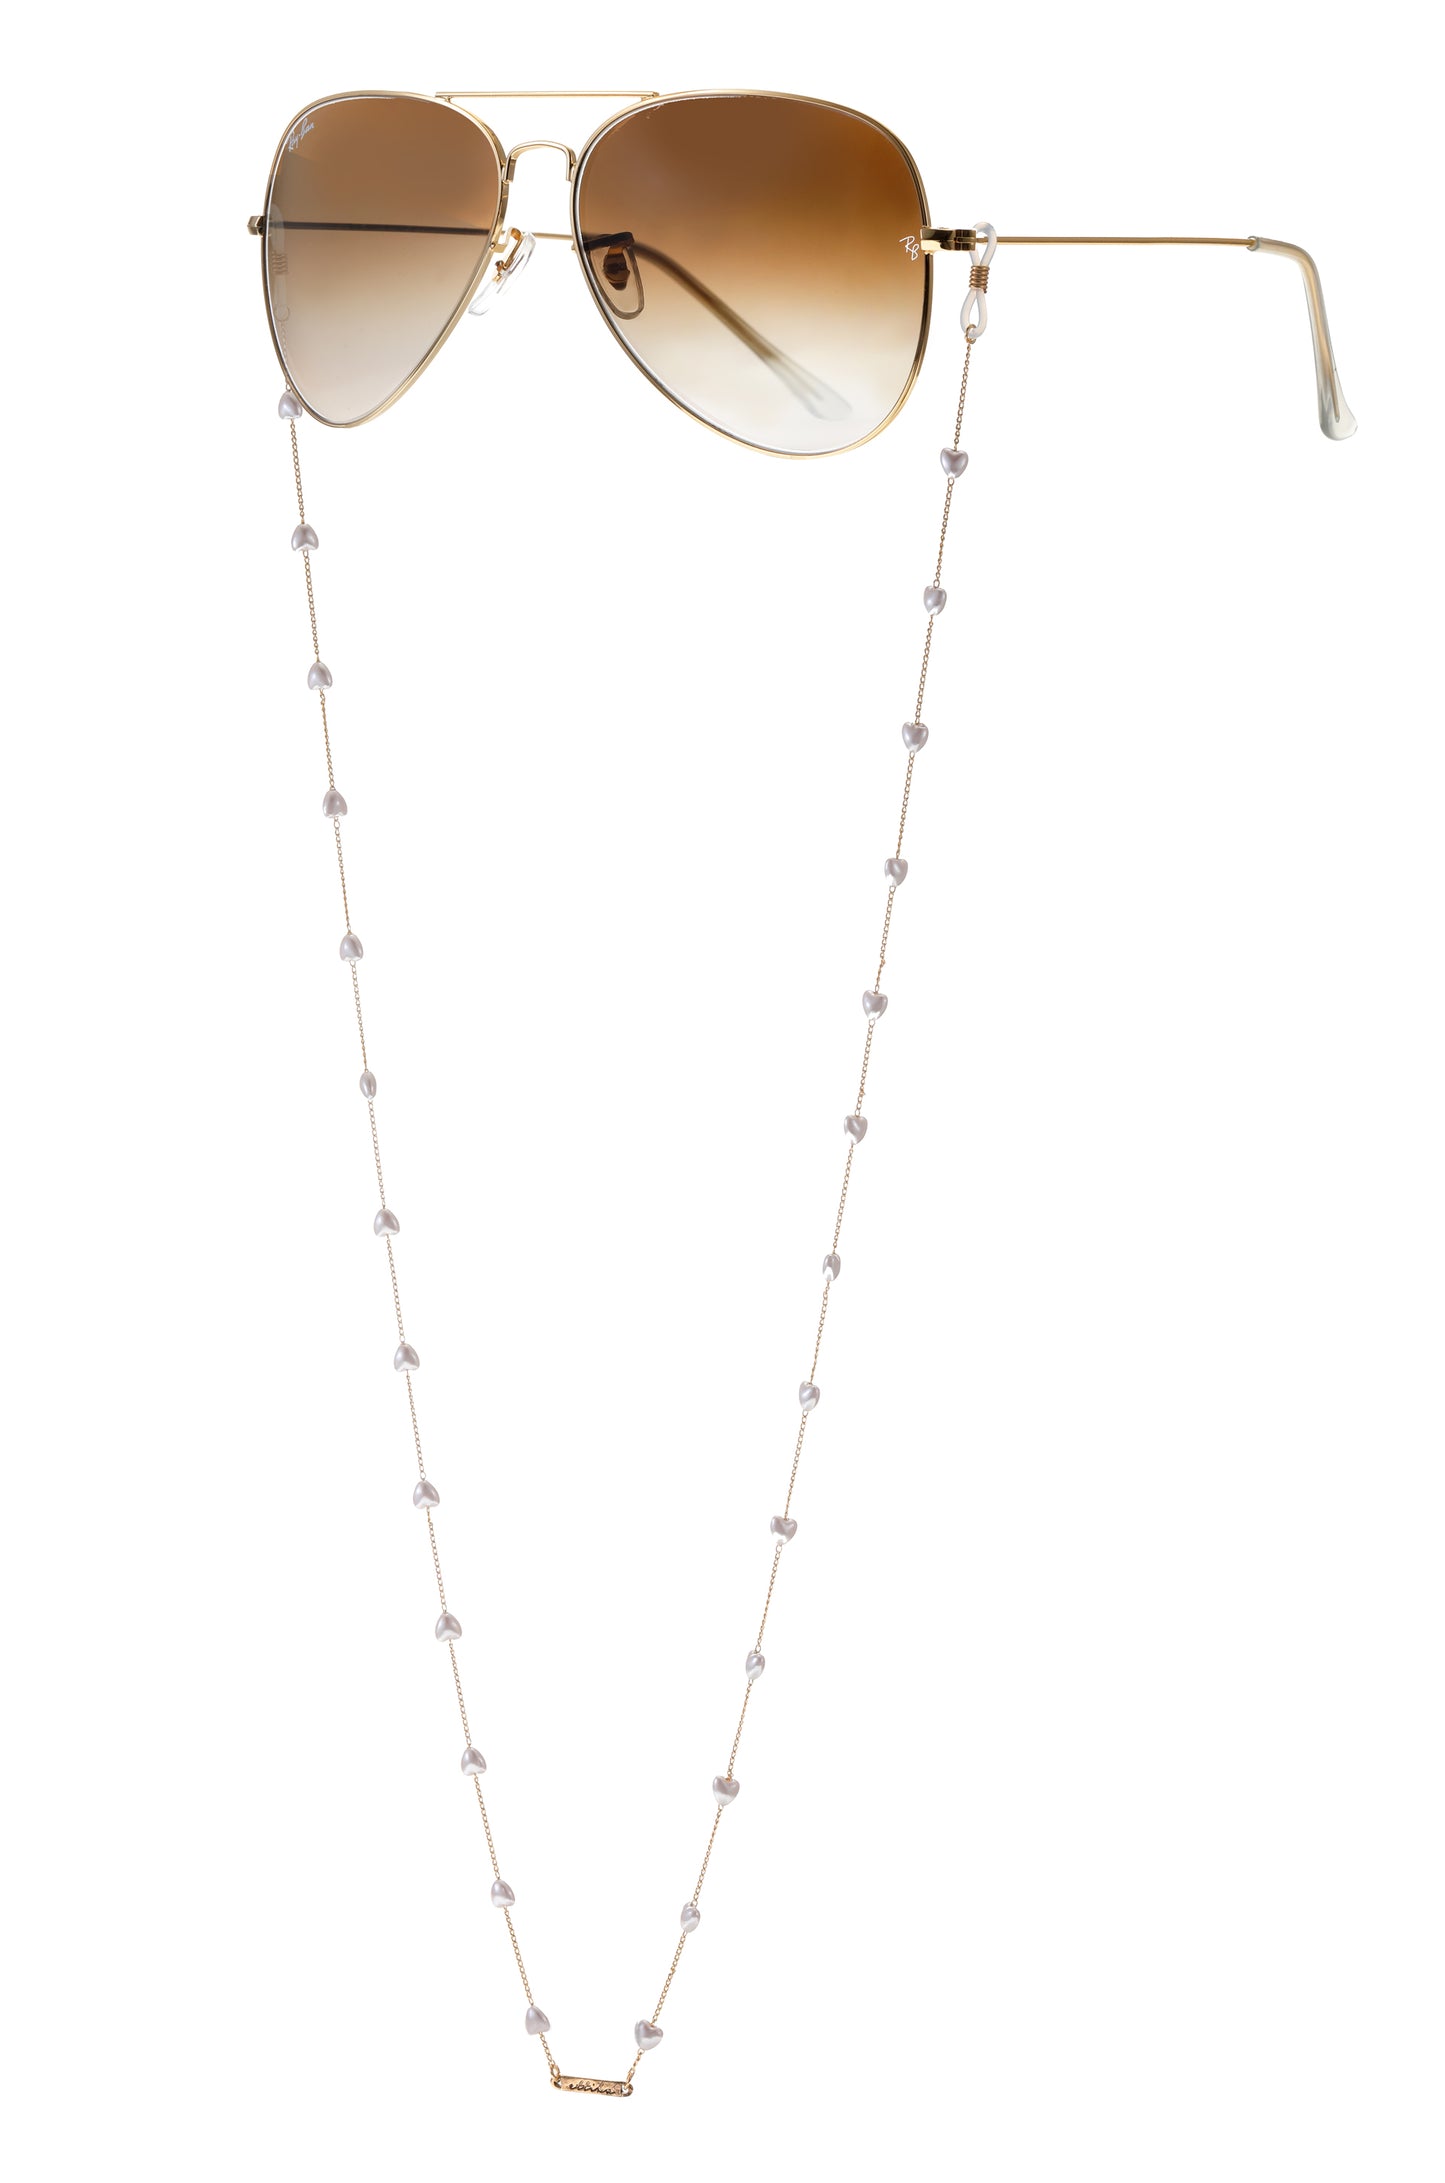 Pearl Lovers Glasses Chain on white